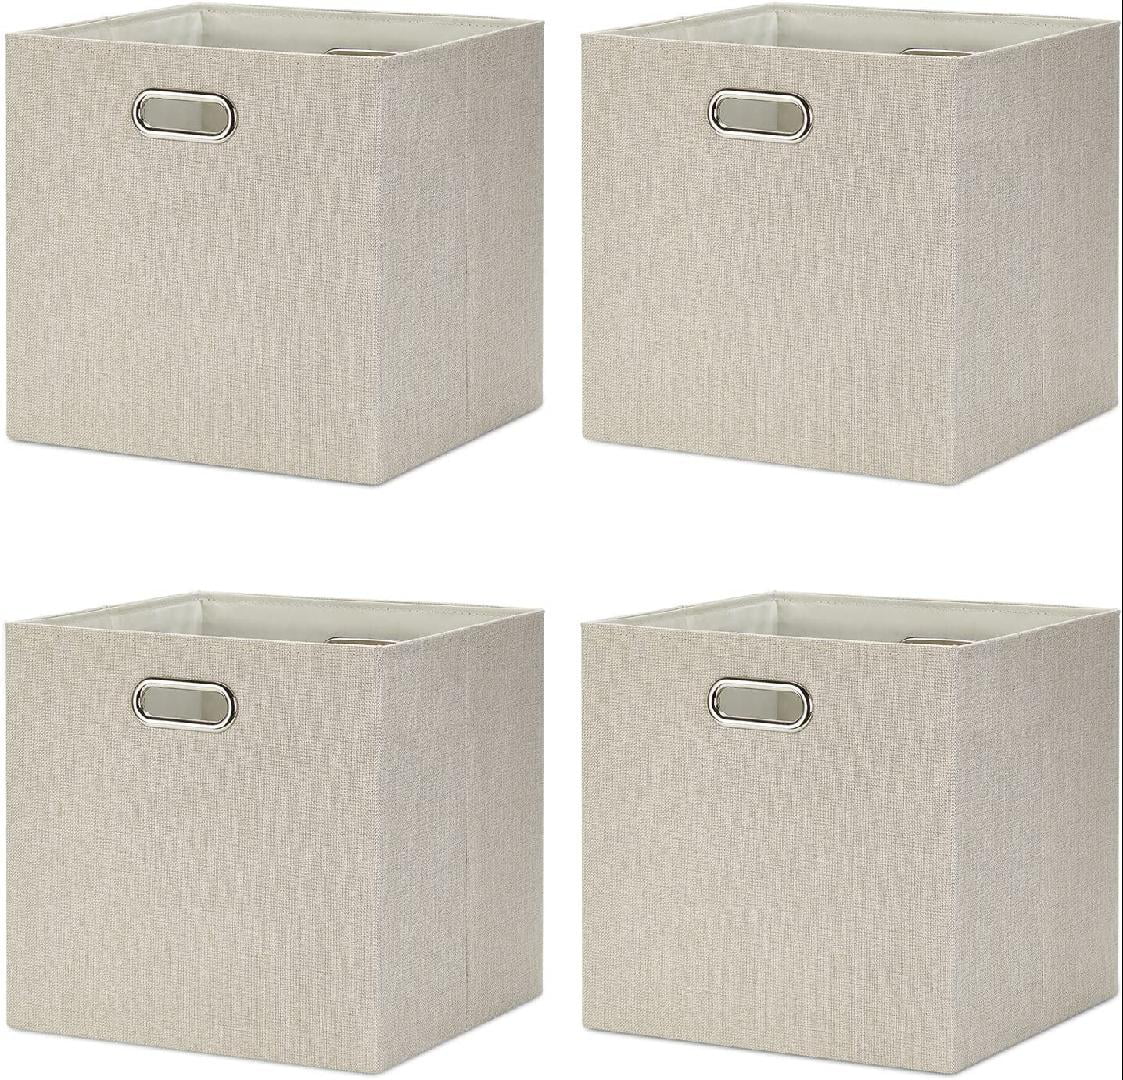 Temary Storage Cubes 12×12 Fabric Cube Storage Bins Foldable Storage Baskets  with Handles, Decorative Storage Boxes for Organizing, Home, Office,  Nursery, Shelf…